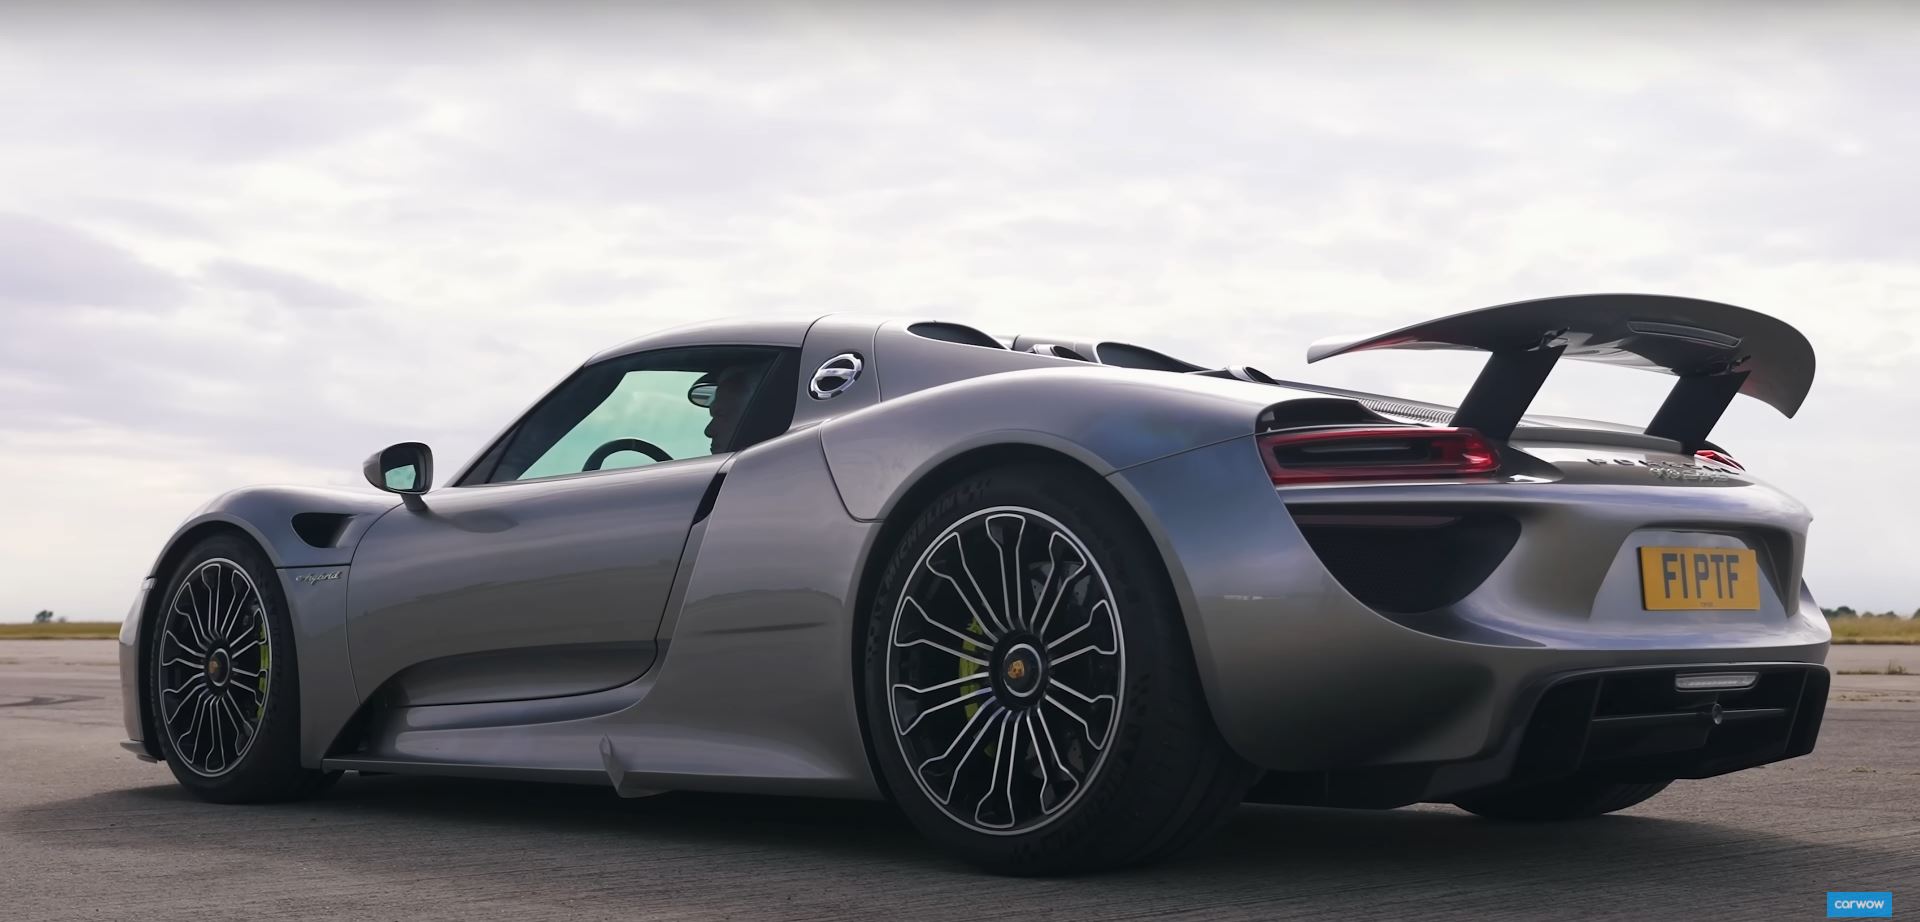 911 Turbo S Drag Races 918 Spyder, This Is What a $1 Million Gap Looks Like  - autoevolution